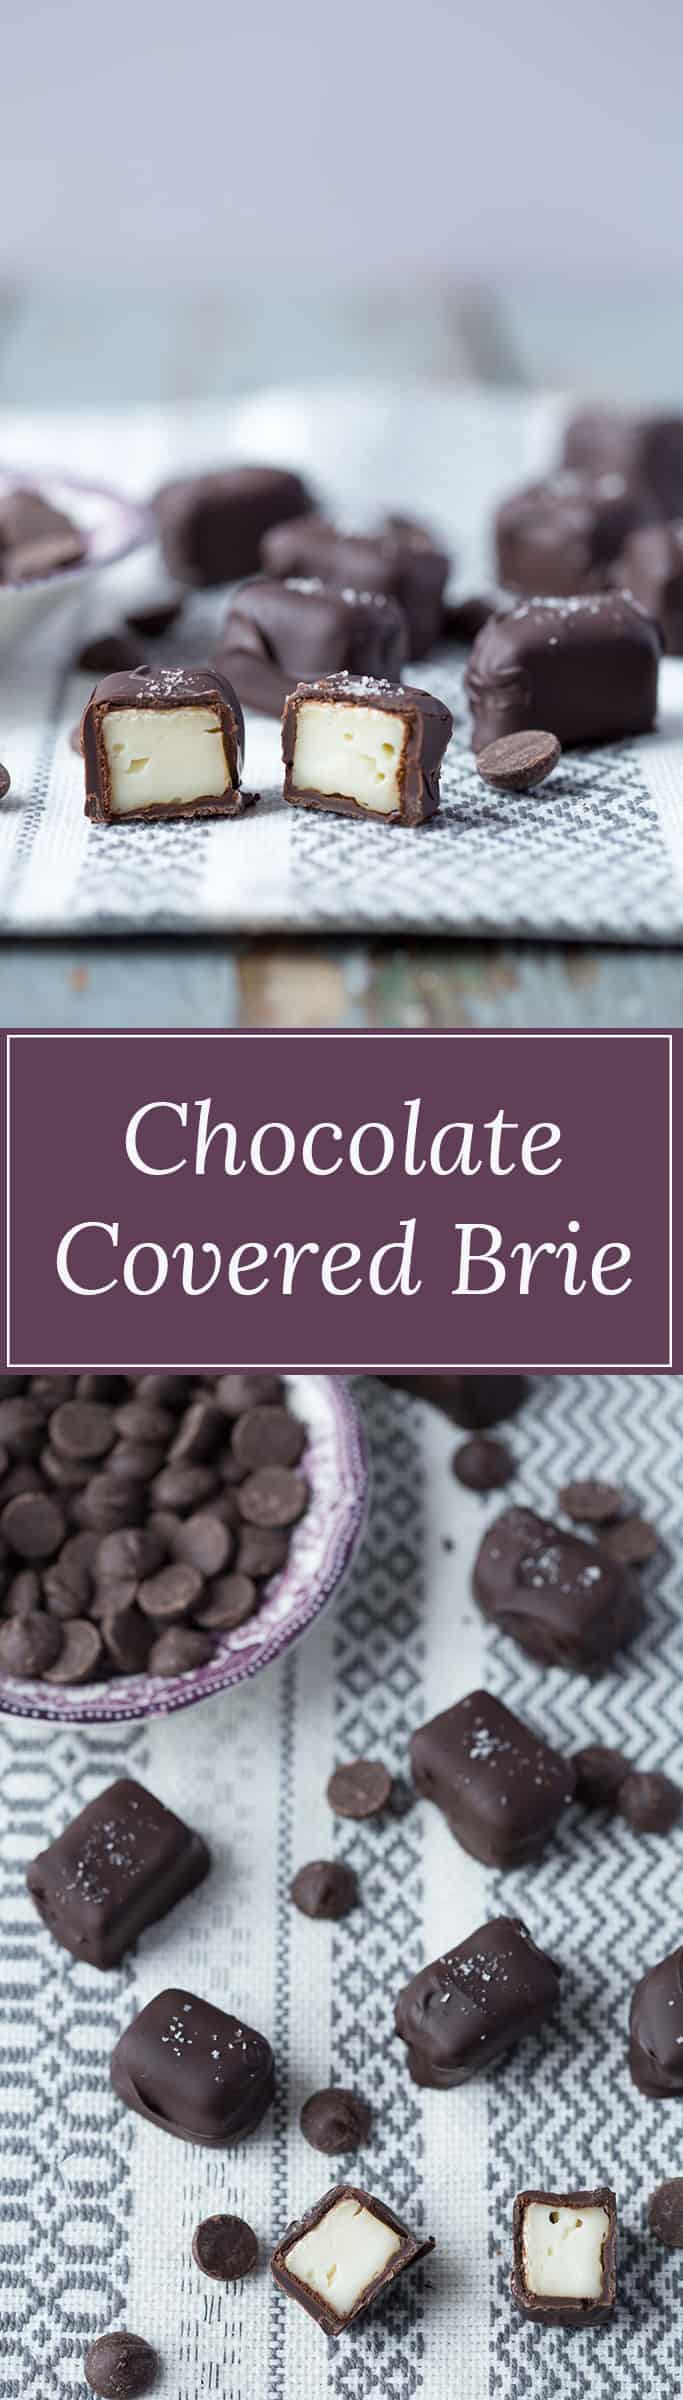 Chocolate Covered Brie